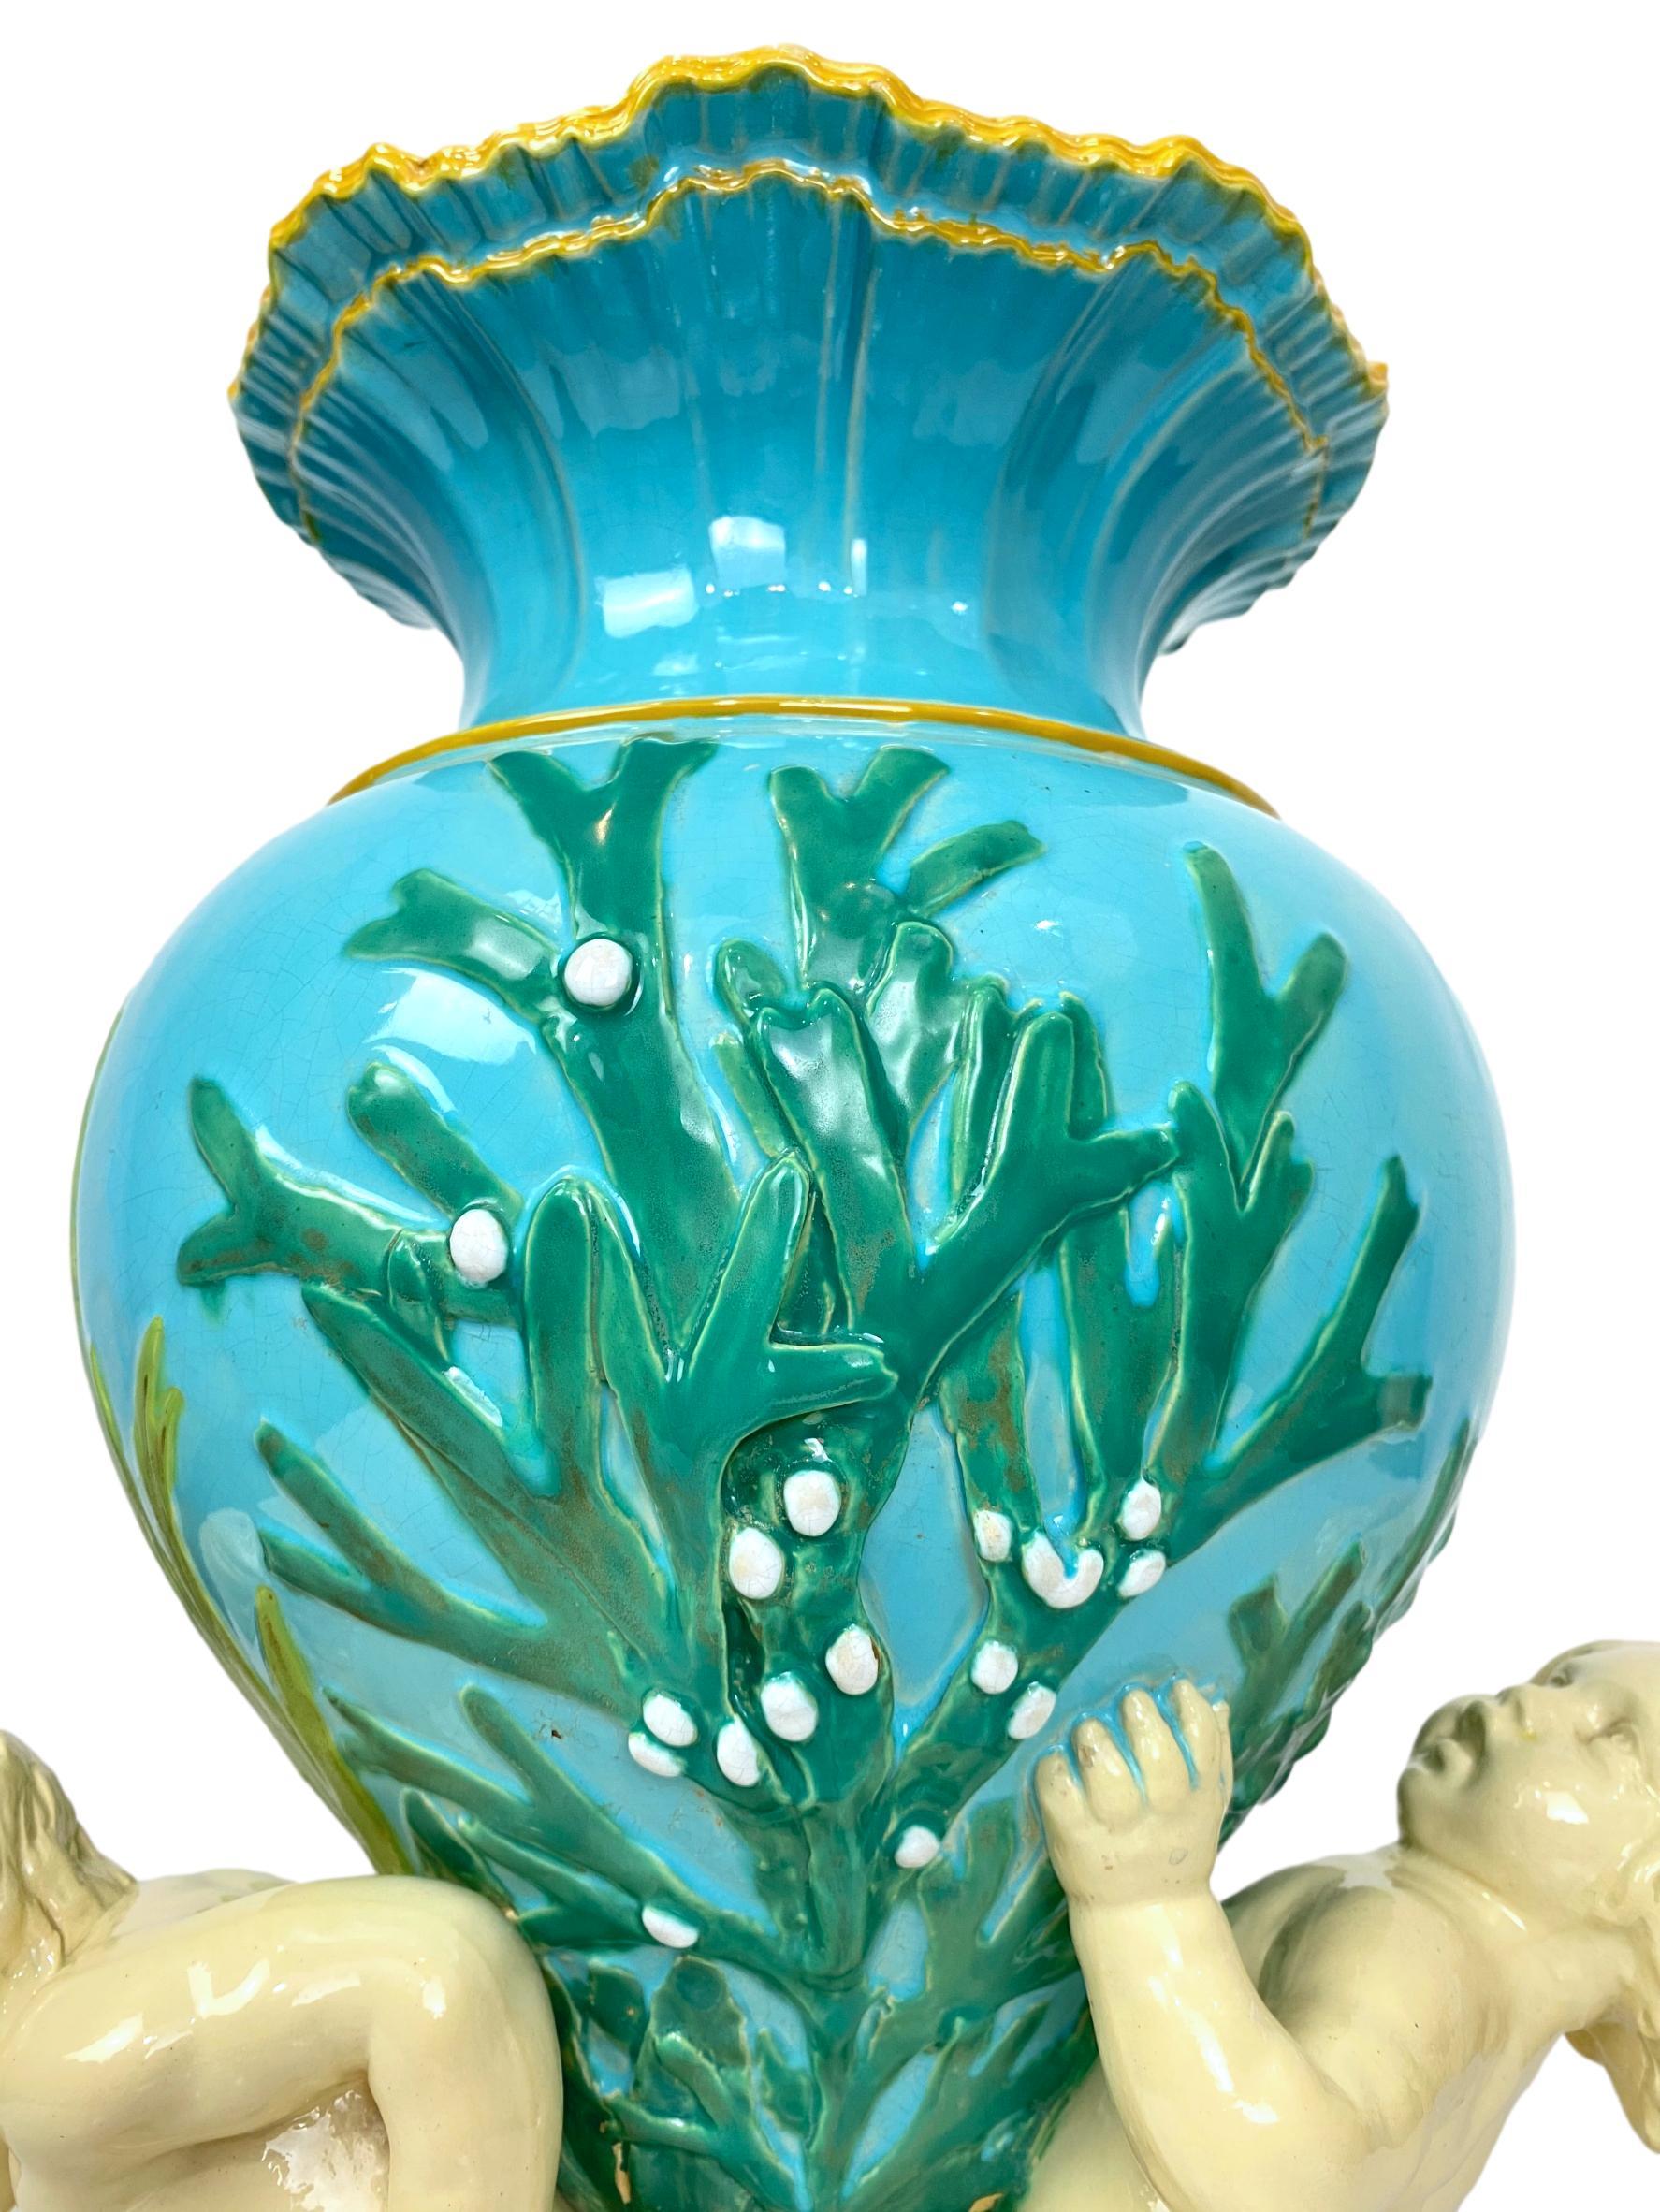 Minton Majolica Triton Marine Vase in Green, Turquoise, and Pink, ca. 1855 3